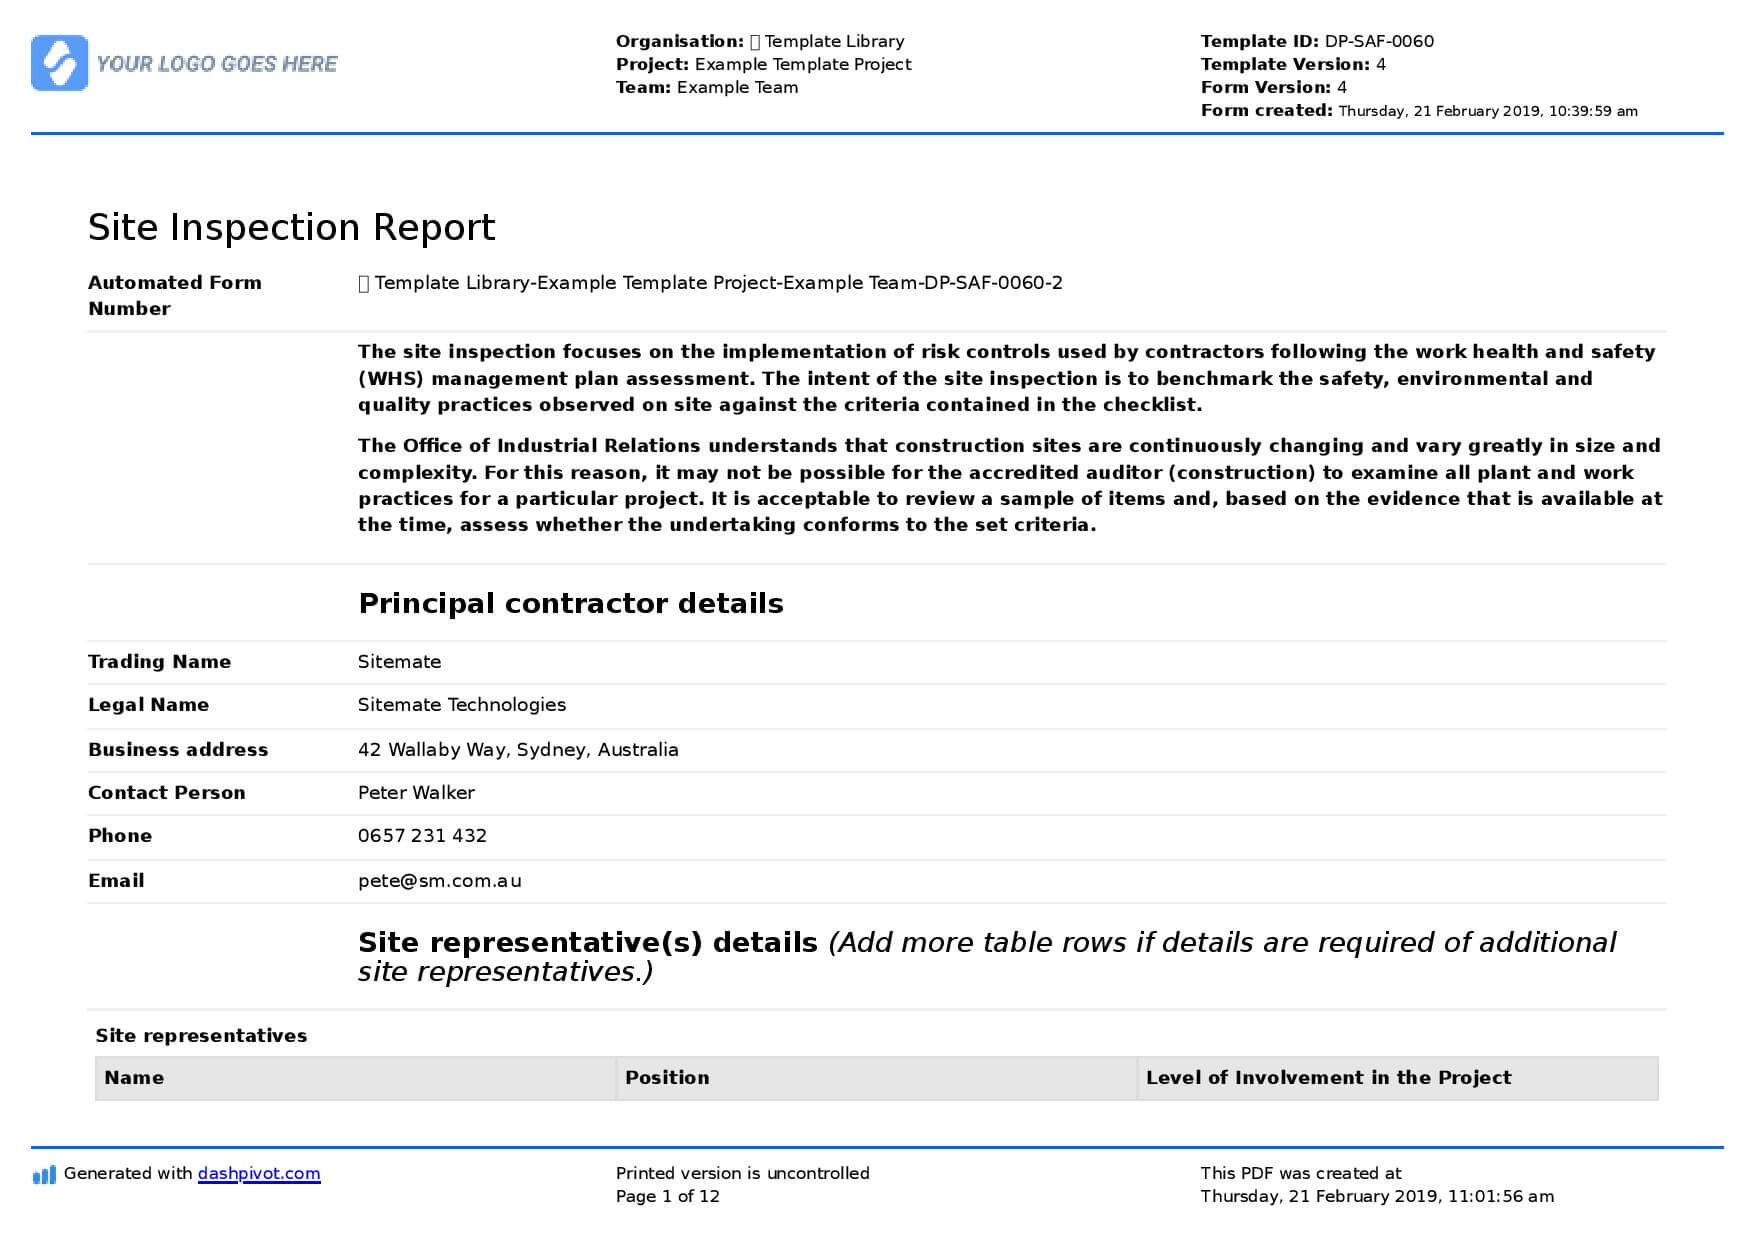 Site Inspection Report: Free Template, Sample And A Proven Inside Part Inspection Report Template